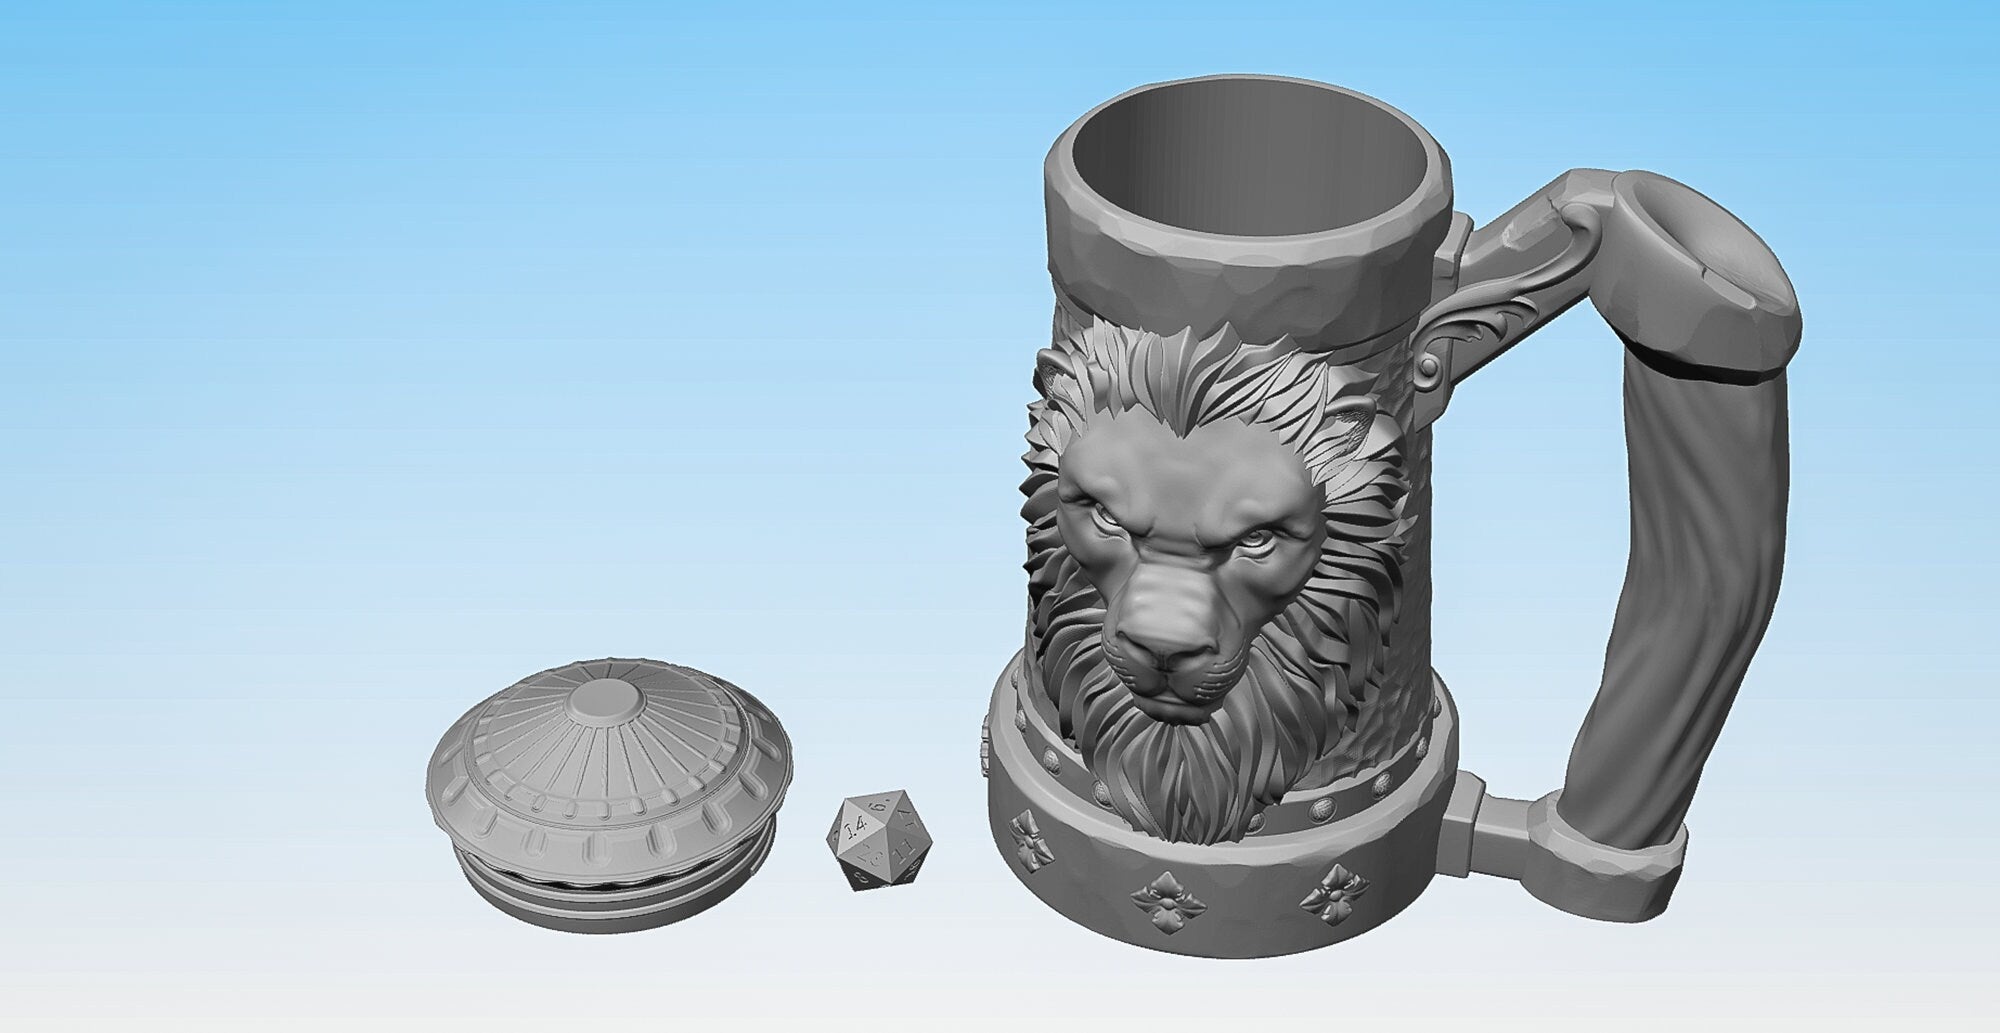 The LION BREW | Mythic Mug | Larp | Gaming Zubehör | Tabletop | Dice Cup | Box | Holder | Dungeons and Dragons | DnD | RPG | Fantasy-Role Playing Games